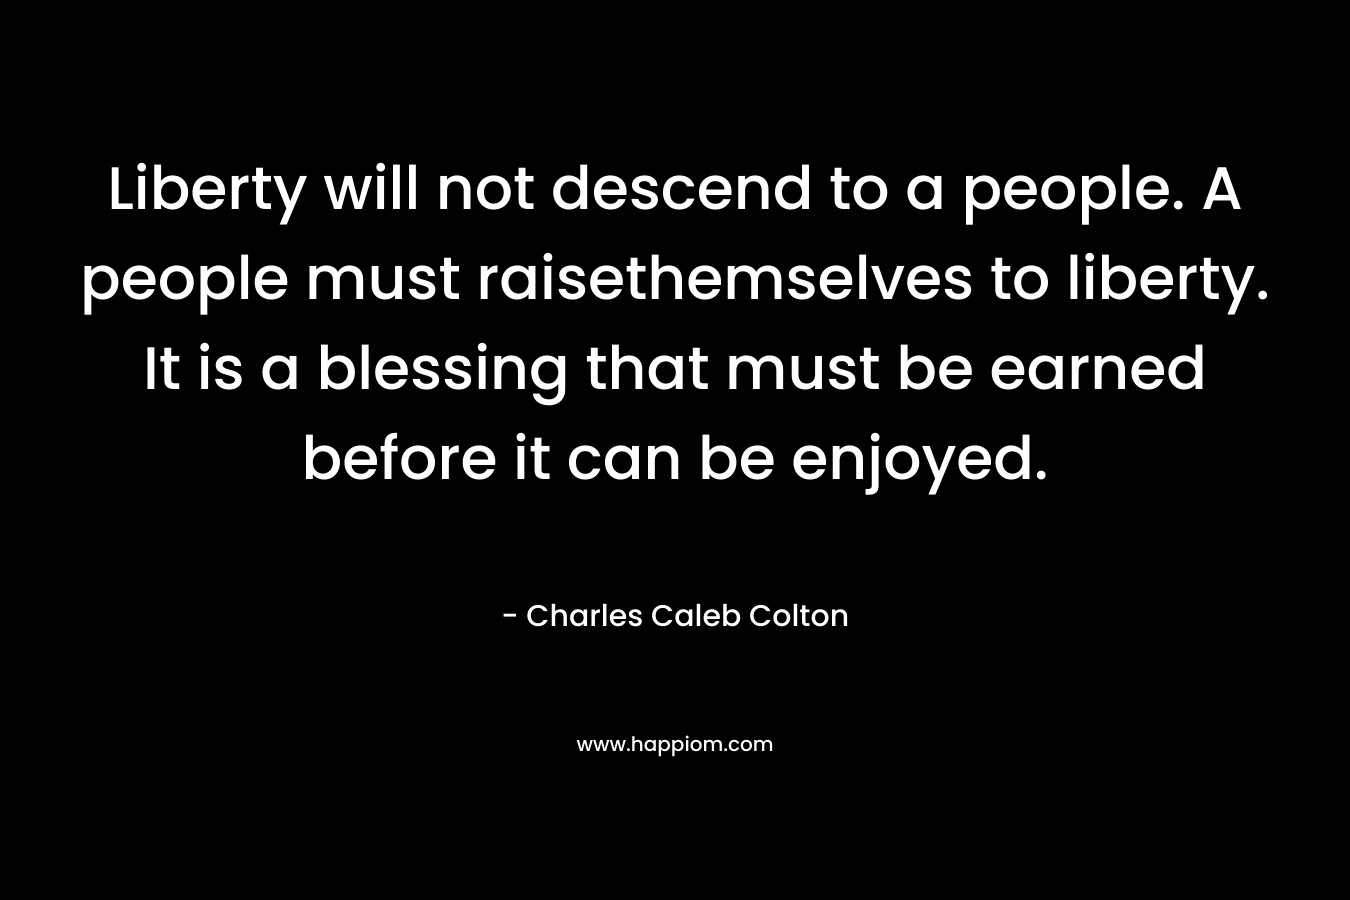 Liberty will not descend to a people. A people must raisethemselves to liberty. It is a blessing that must be earned before it can be enjoyed.